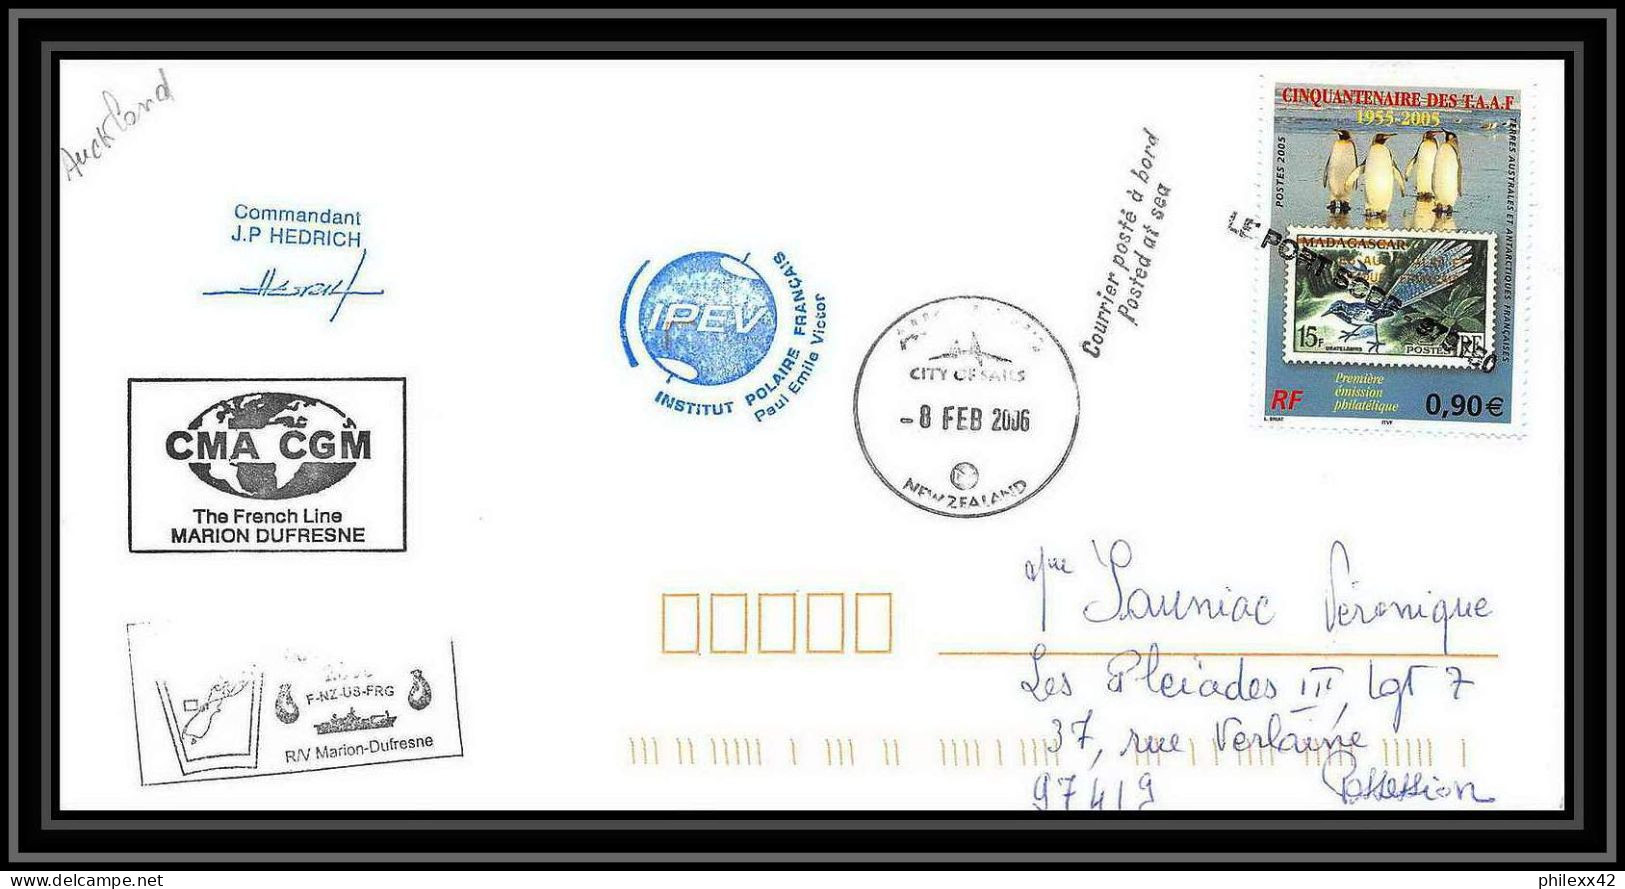 2562 ANTARCTIC NEW ZELAN AUCKLAND-Lettre Cover Dufresne 2 Signé Signed 8/2/2006 N°430 Obl Griffe - Spedizioni Antartiche